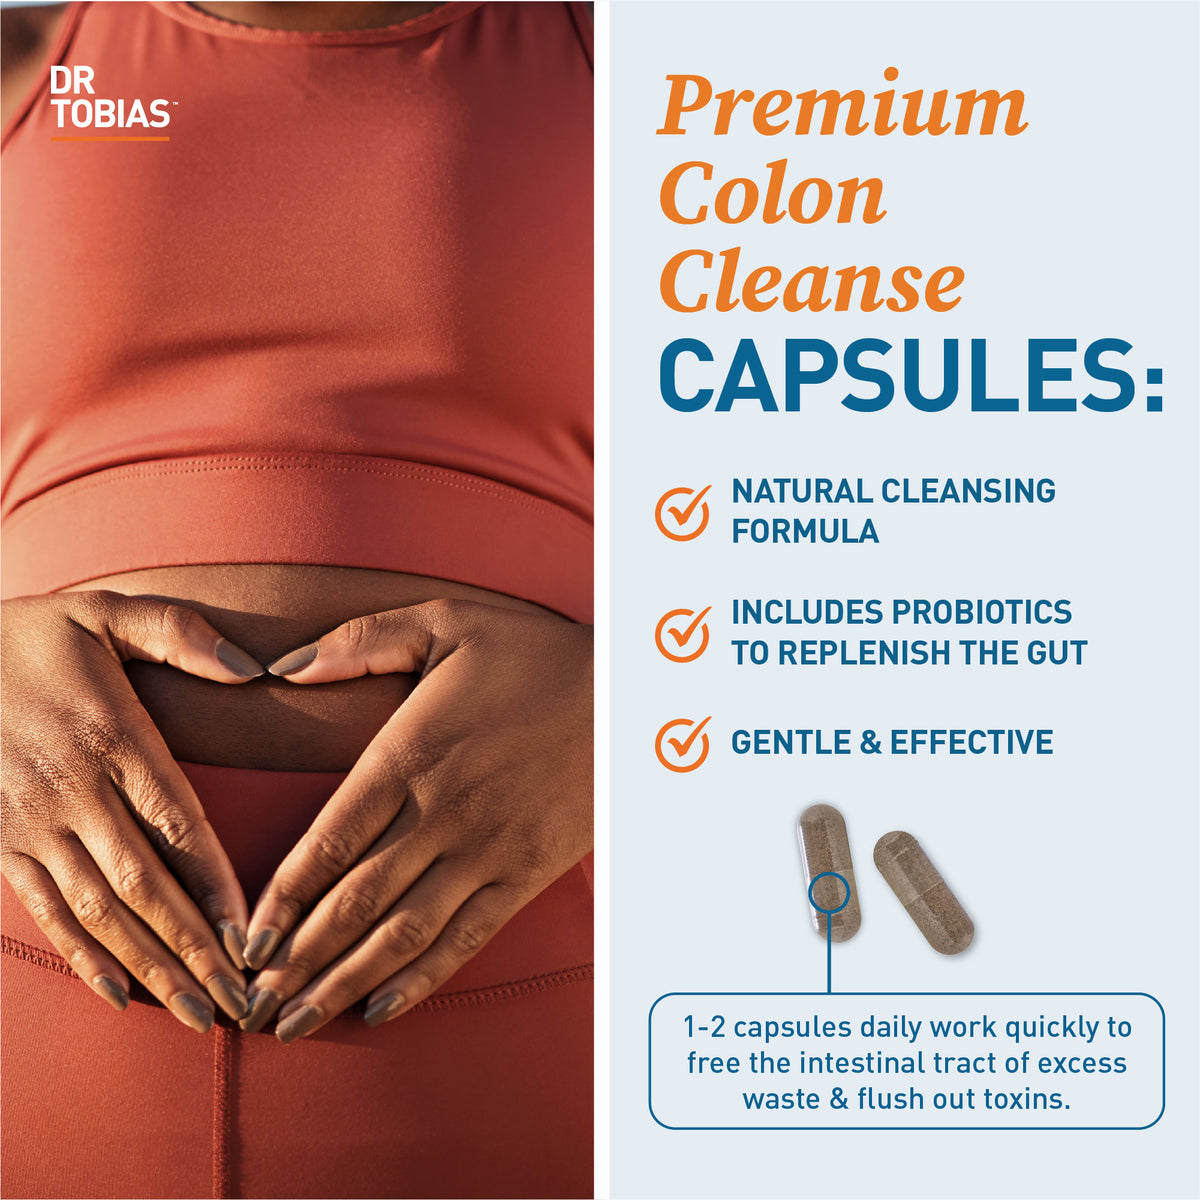 premium colon cleanse capsules with natural cleansing formula, includes probiotics to replenish the gut, gentle and effective